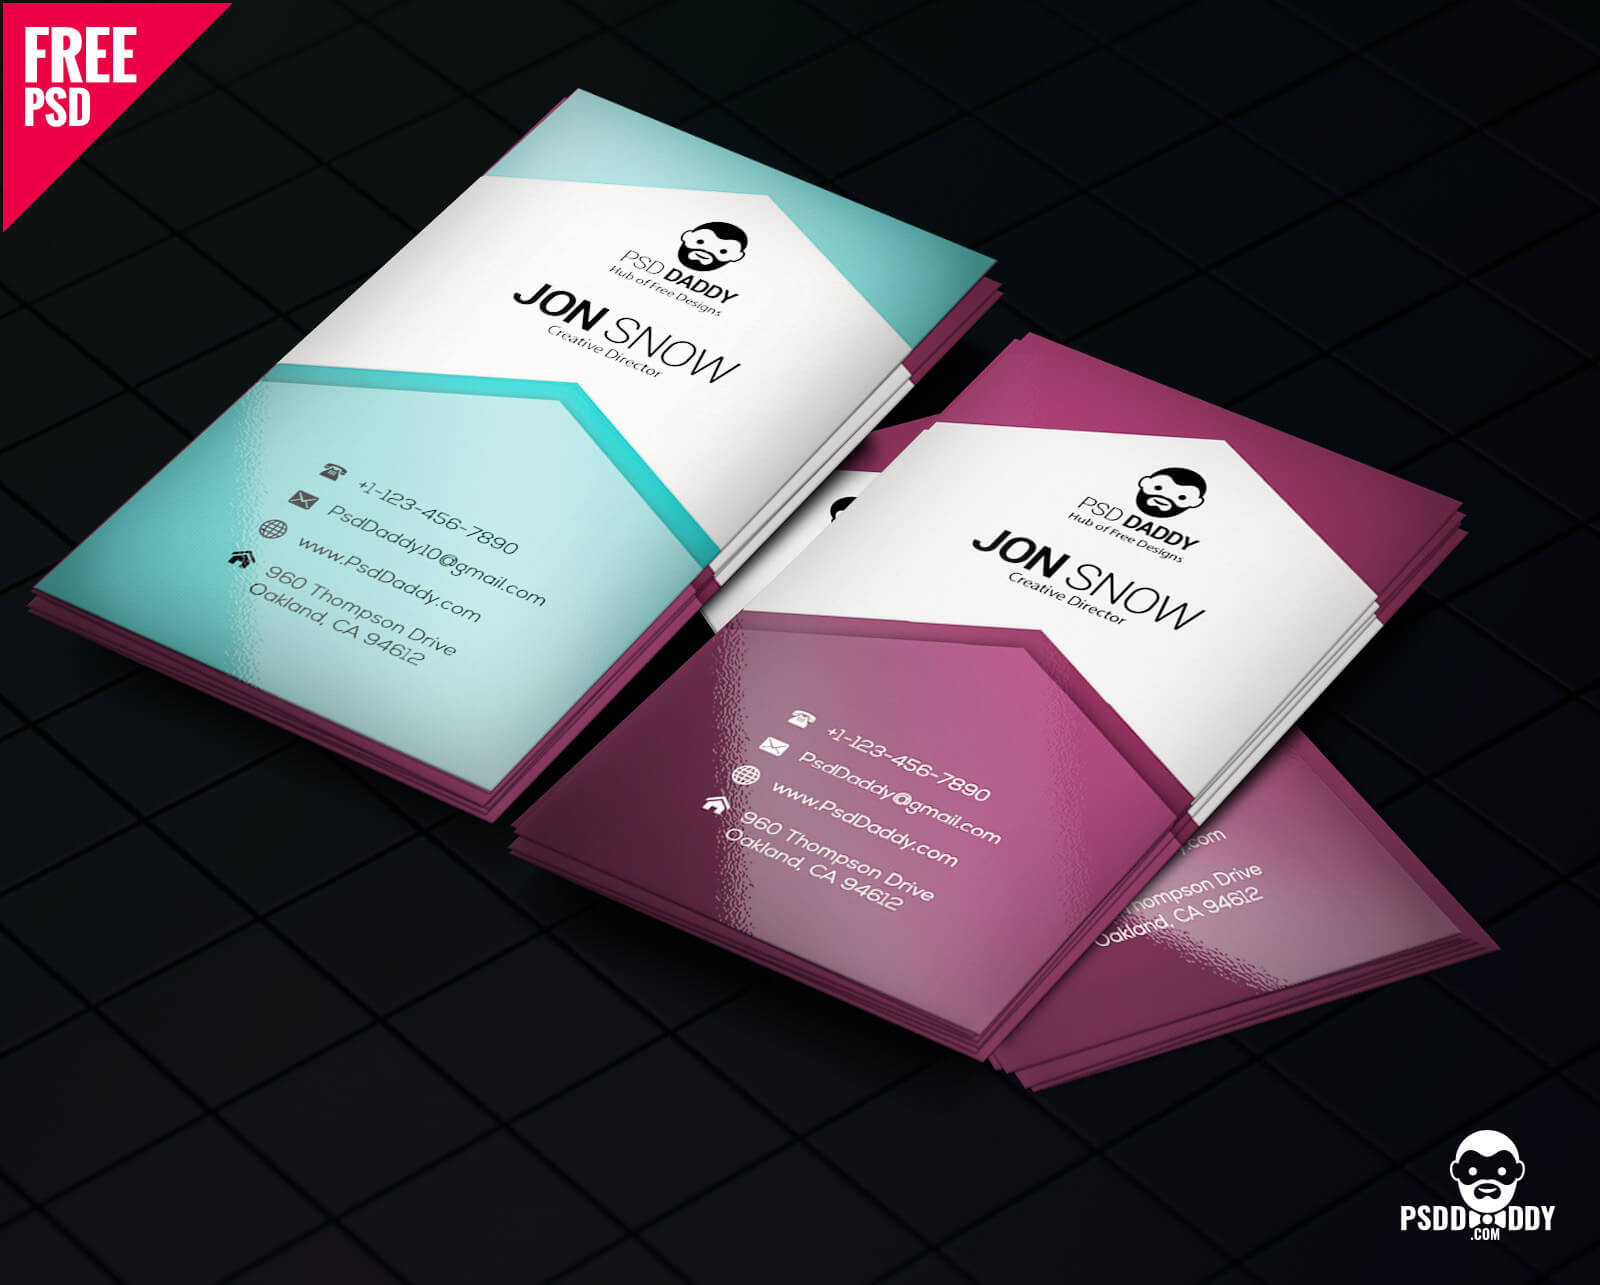 Download]Creative Business Card Psd Free | Psddaddy For Name Card Photoshop Template